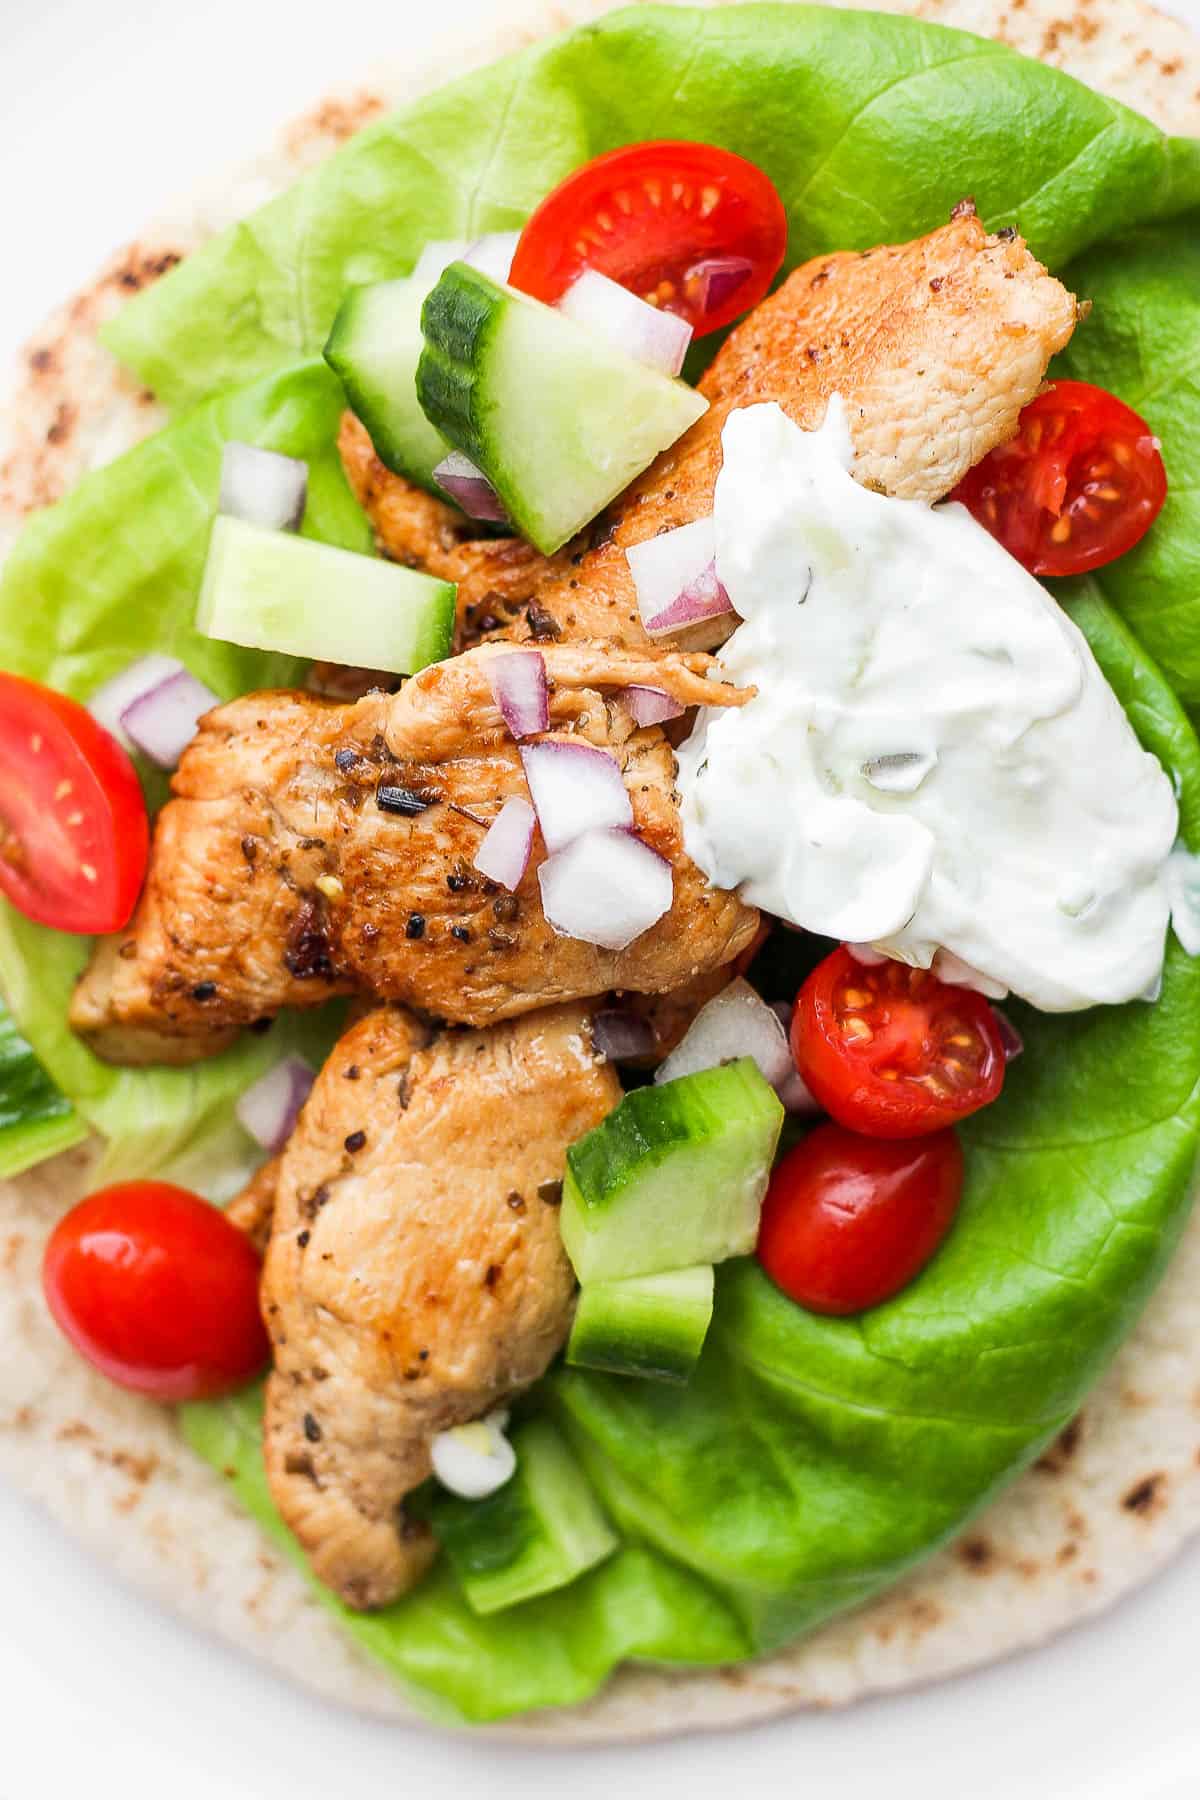 A pita bread with lettuce, chicken, veggies, and sauce on top.